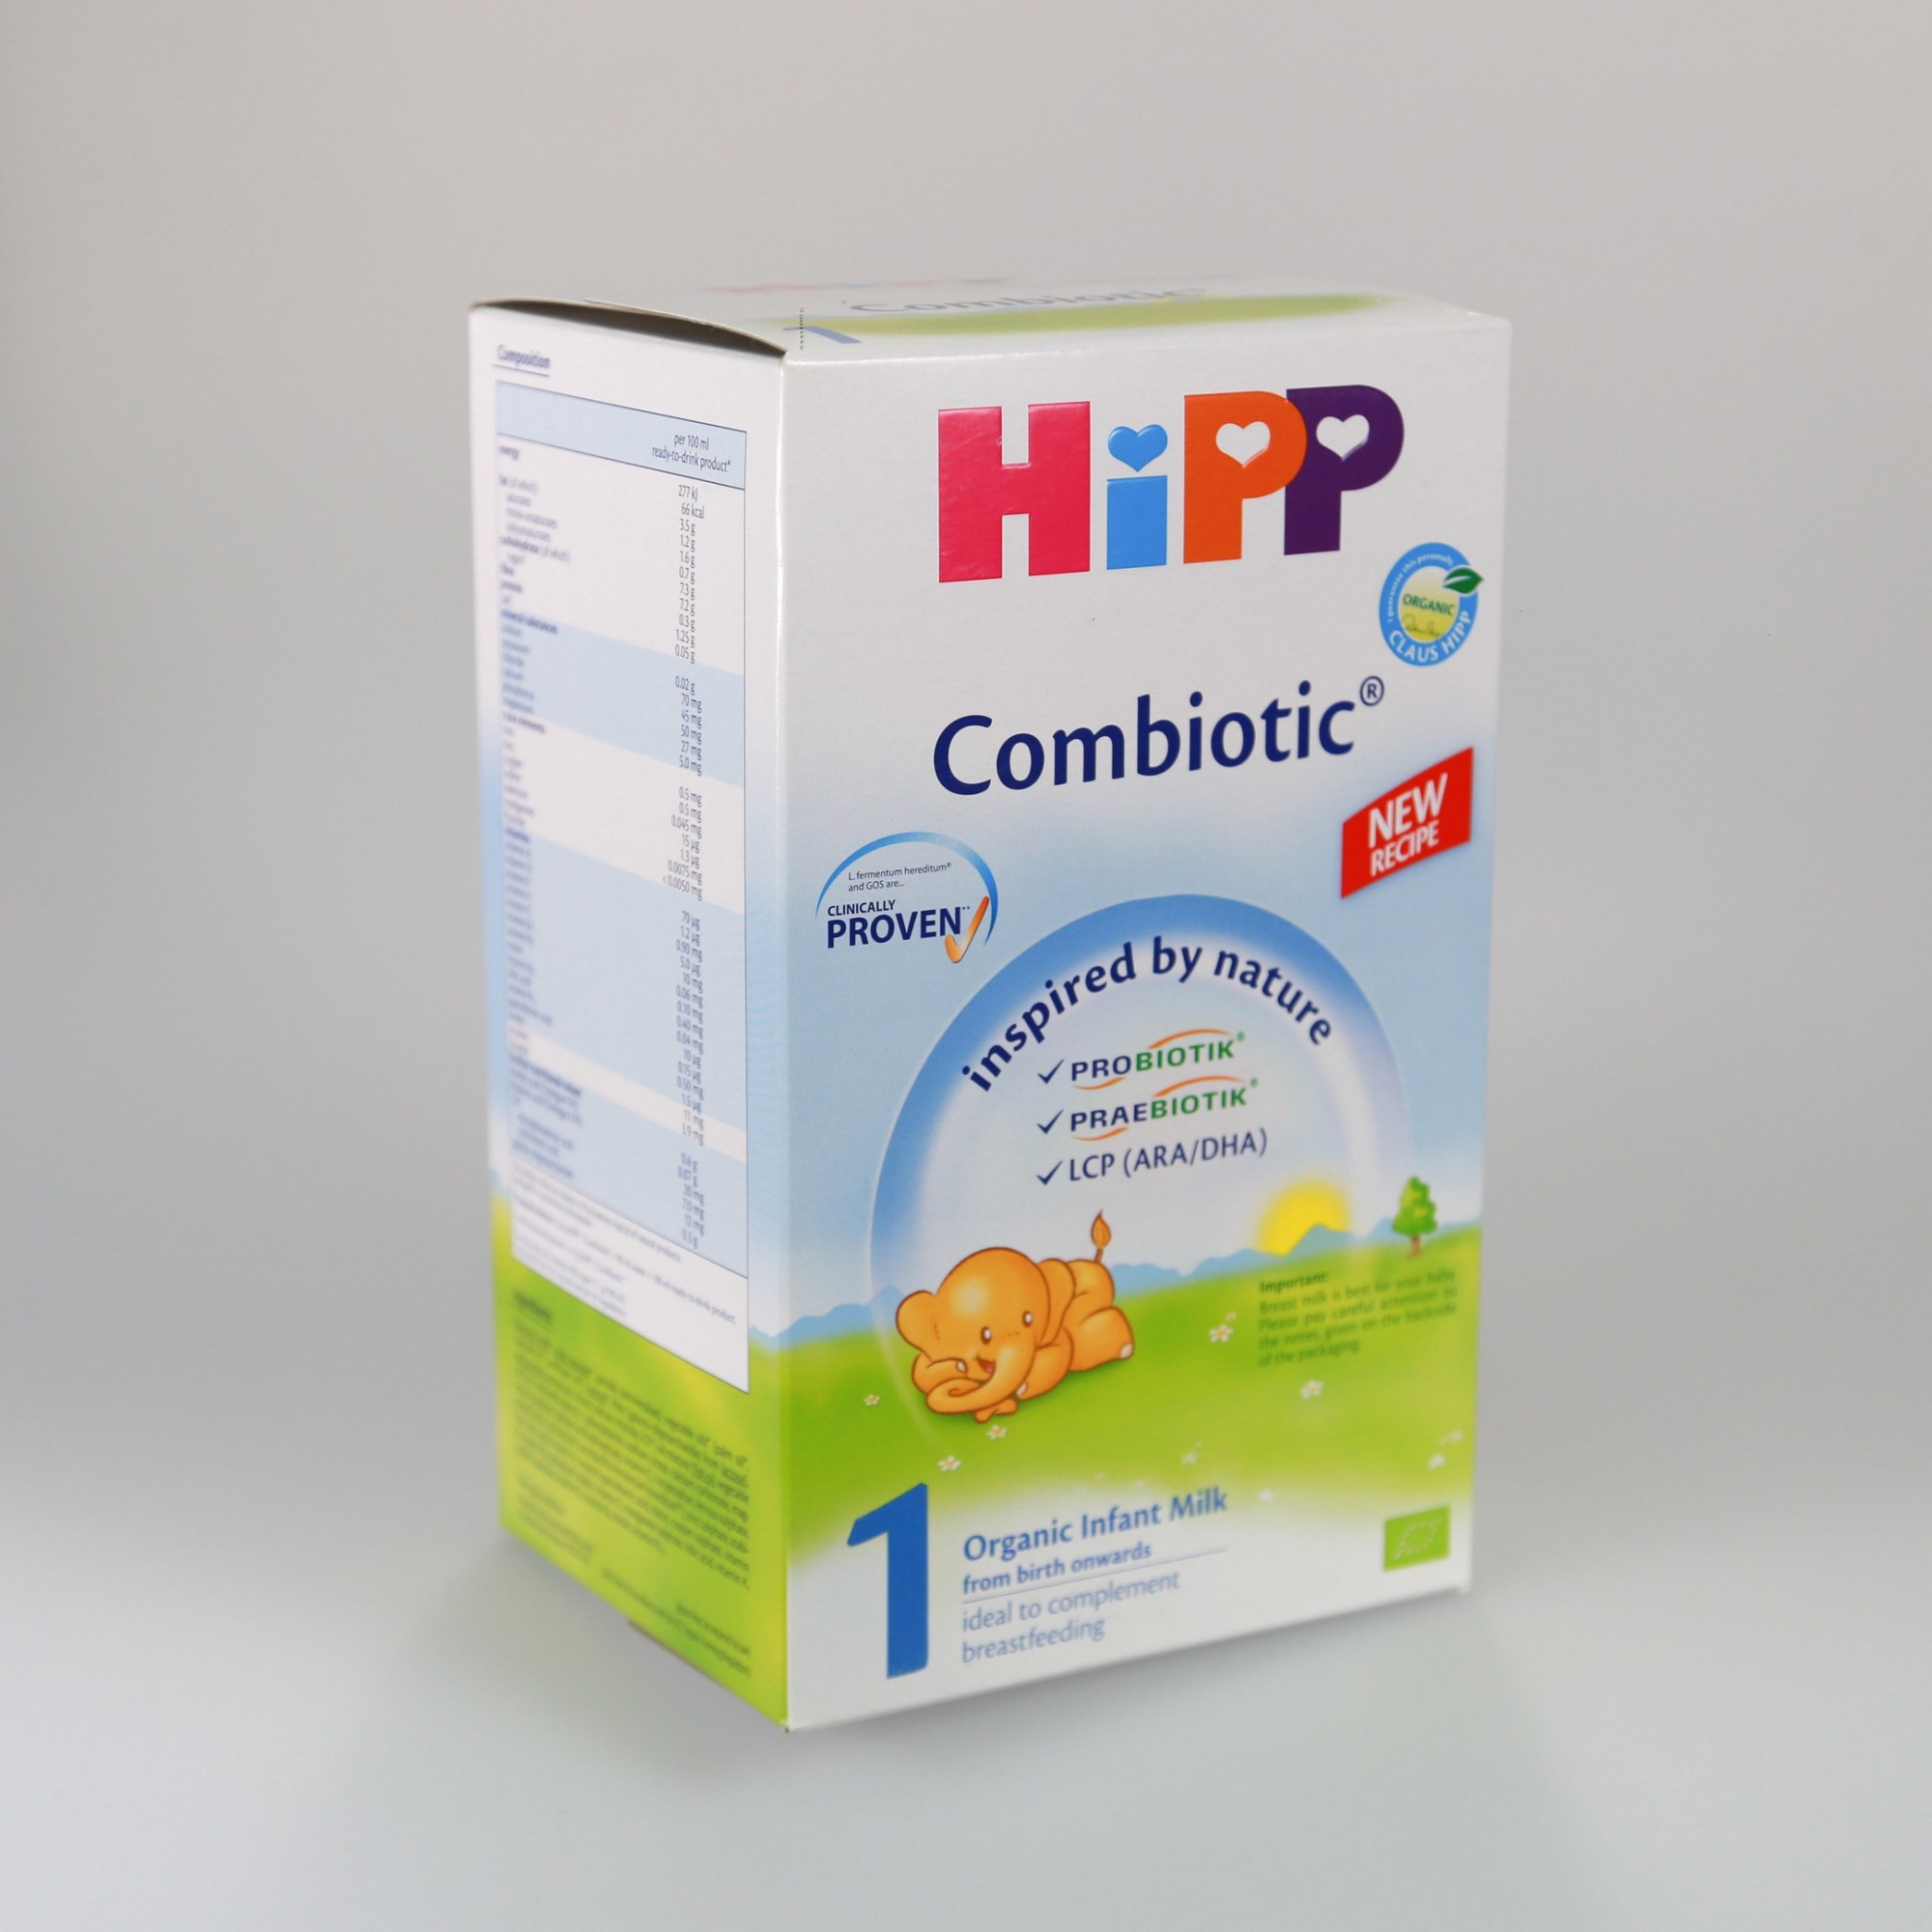 HiPP Formula Clean, Organic, and Nutritionally Complete The Video Ink